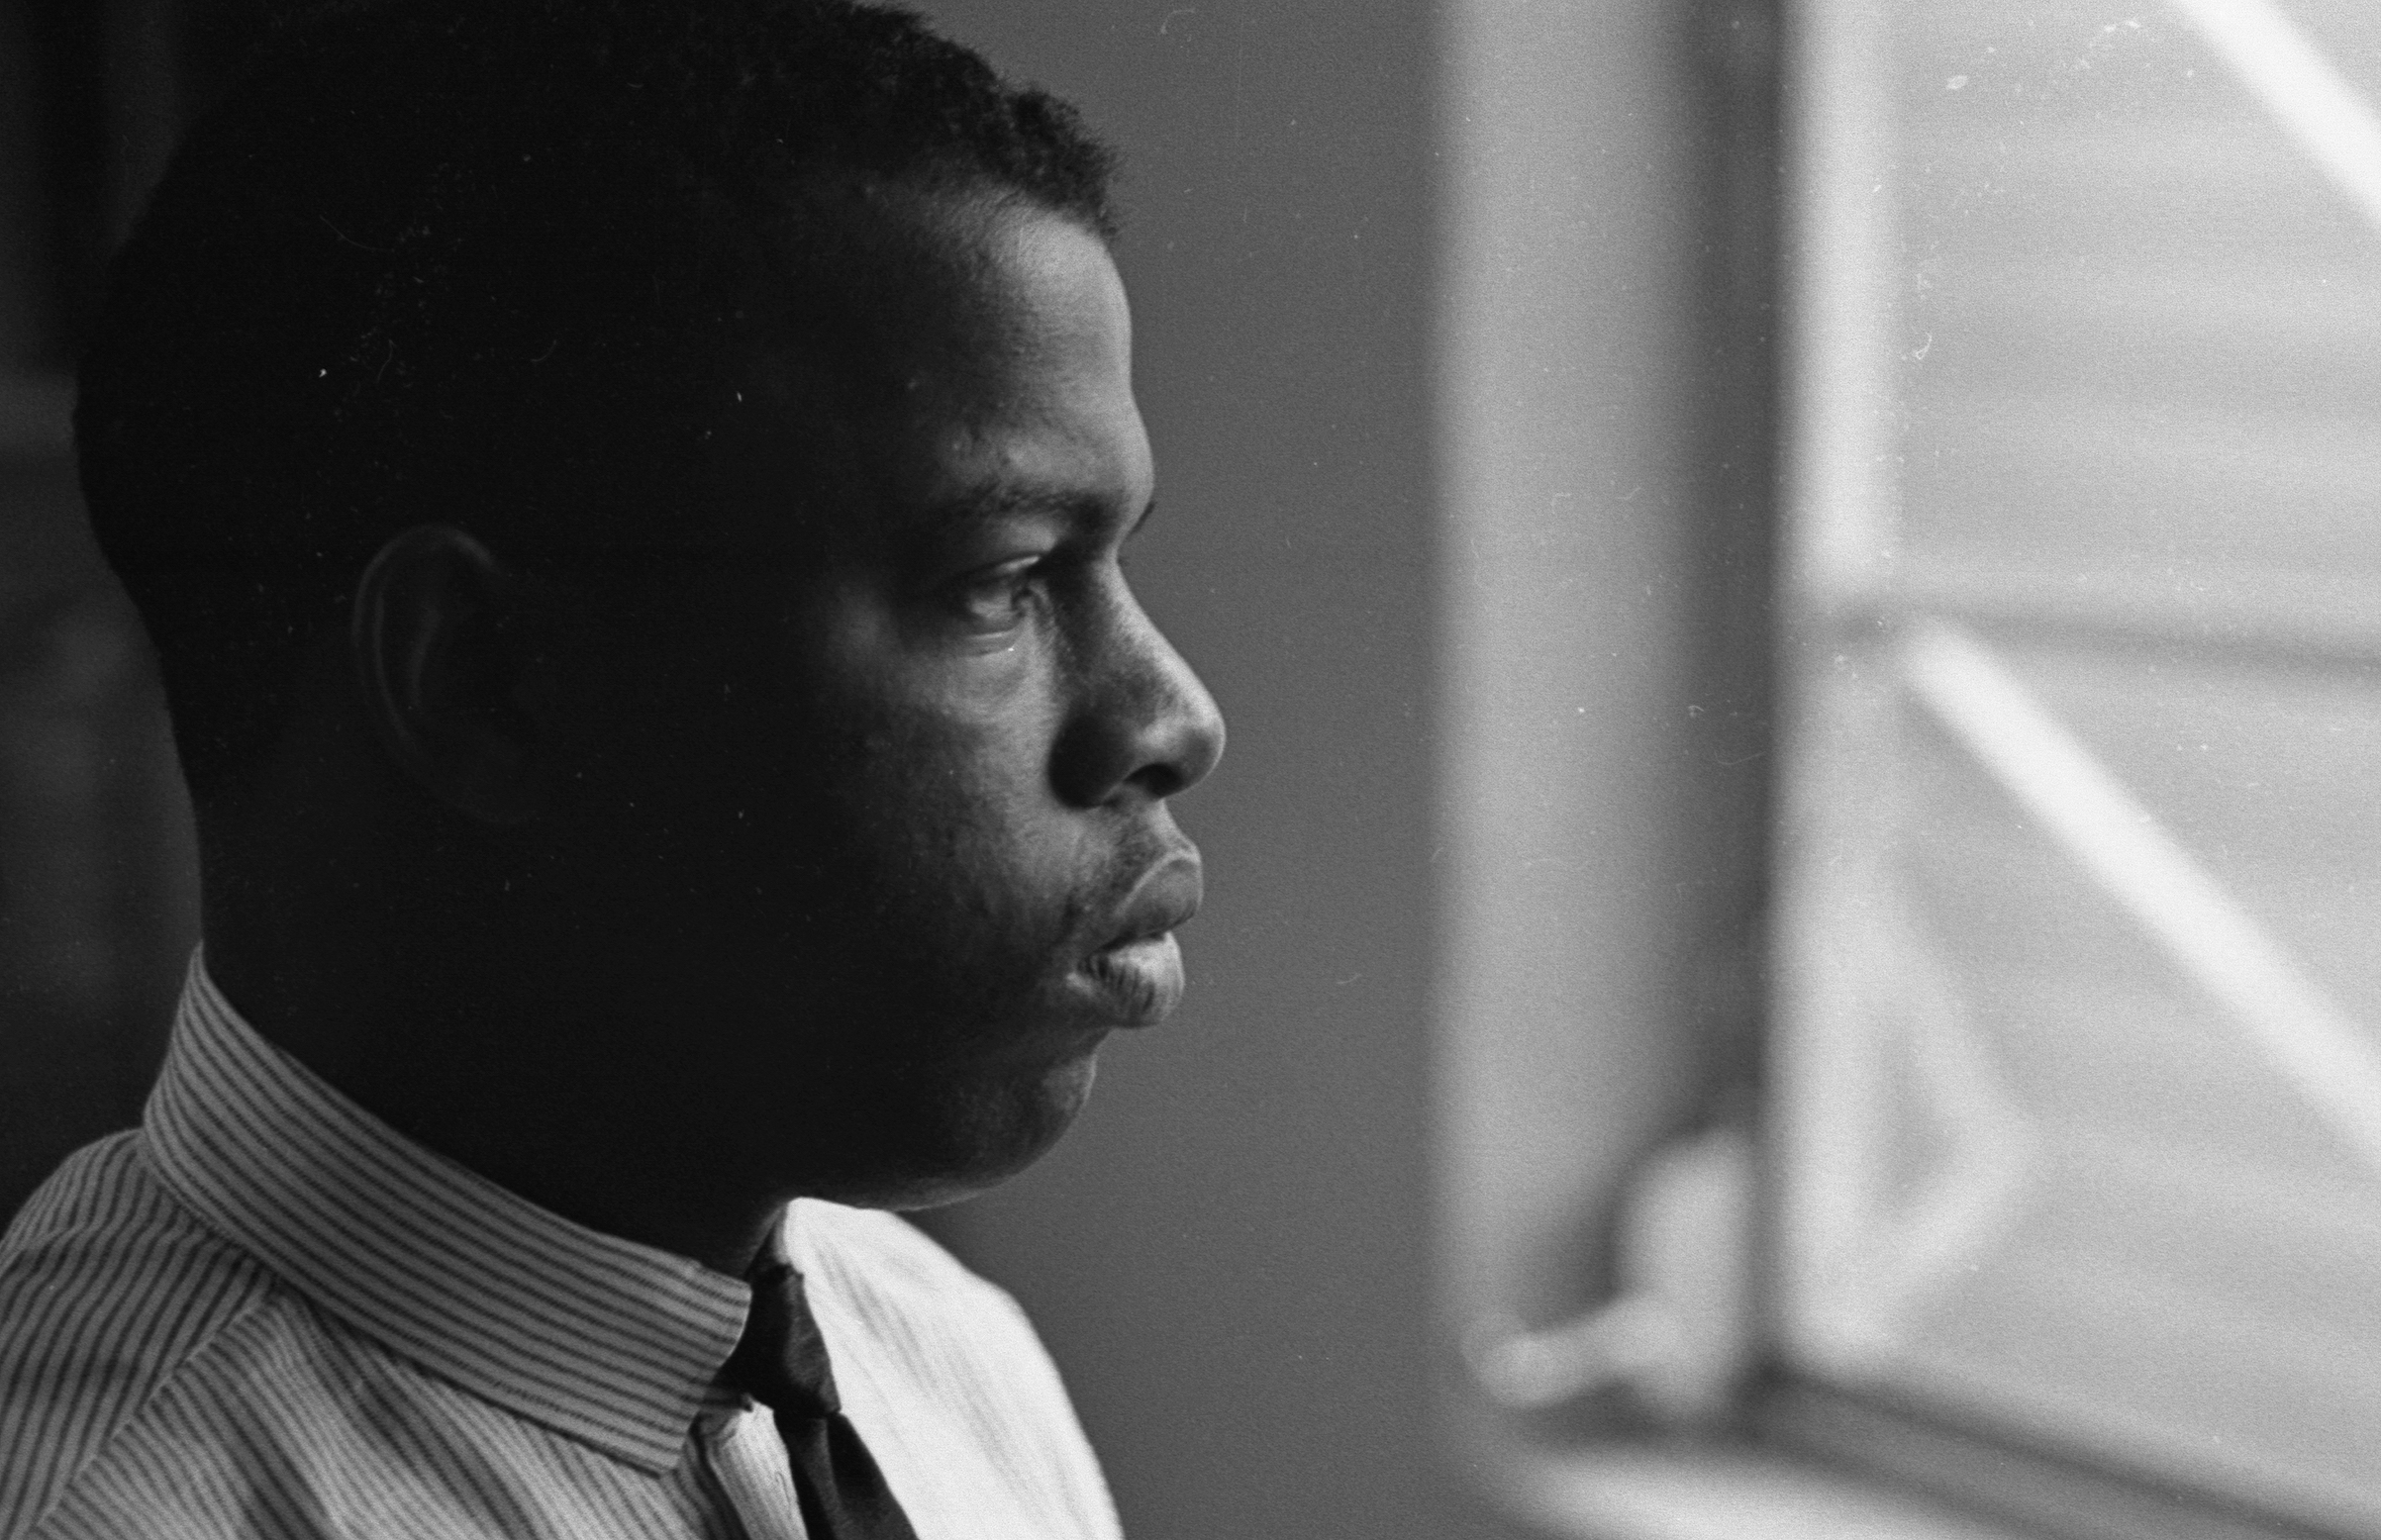 American Civil Rights activist (and future politician) John Lewis, chairman of the Student Non-Violent Coordinating Committee (SNCC), in an office in New York City, 1964. (Getty Images)